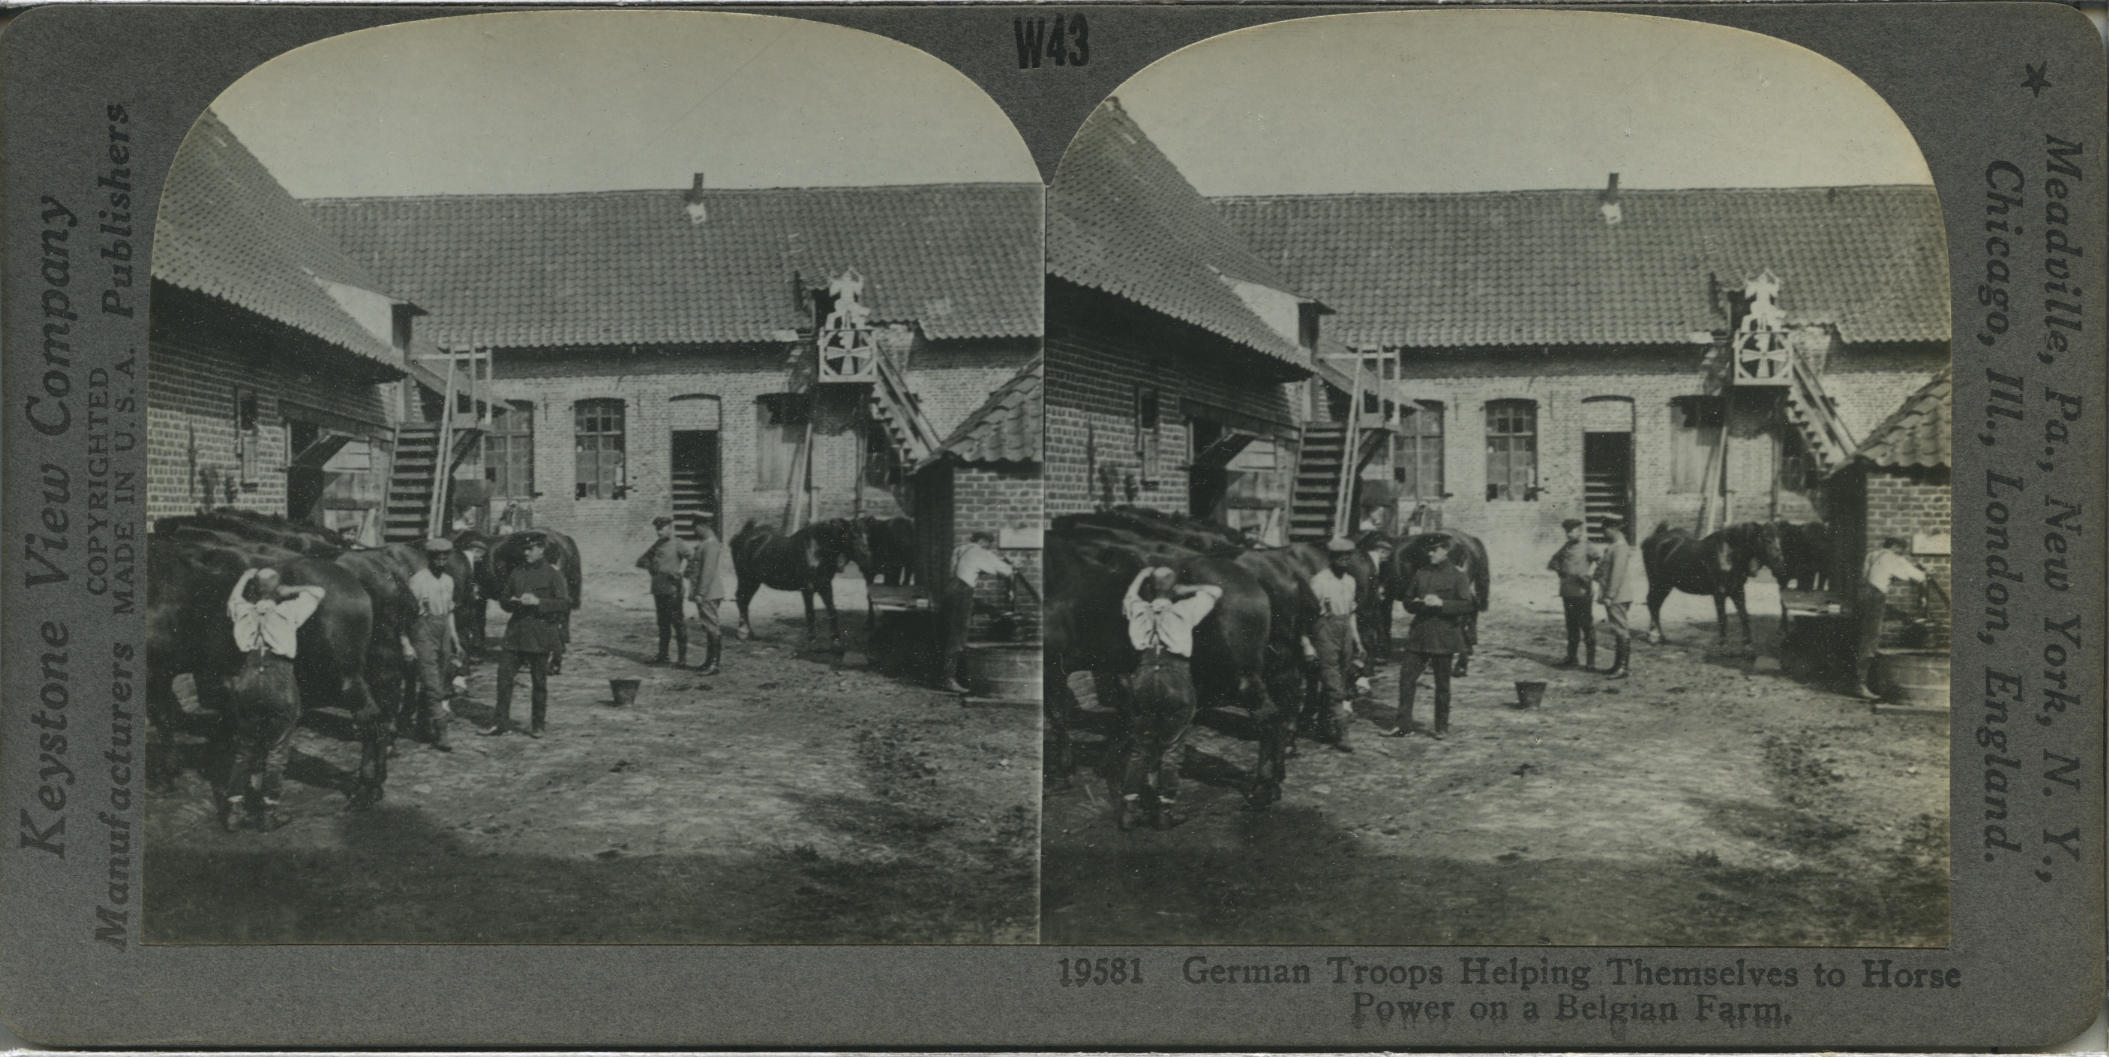 German Troops Helping Themselves to Horse Power on a Belgian Farm